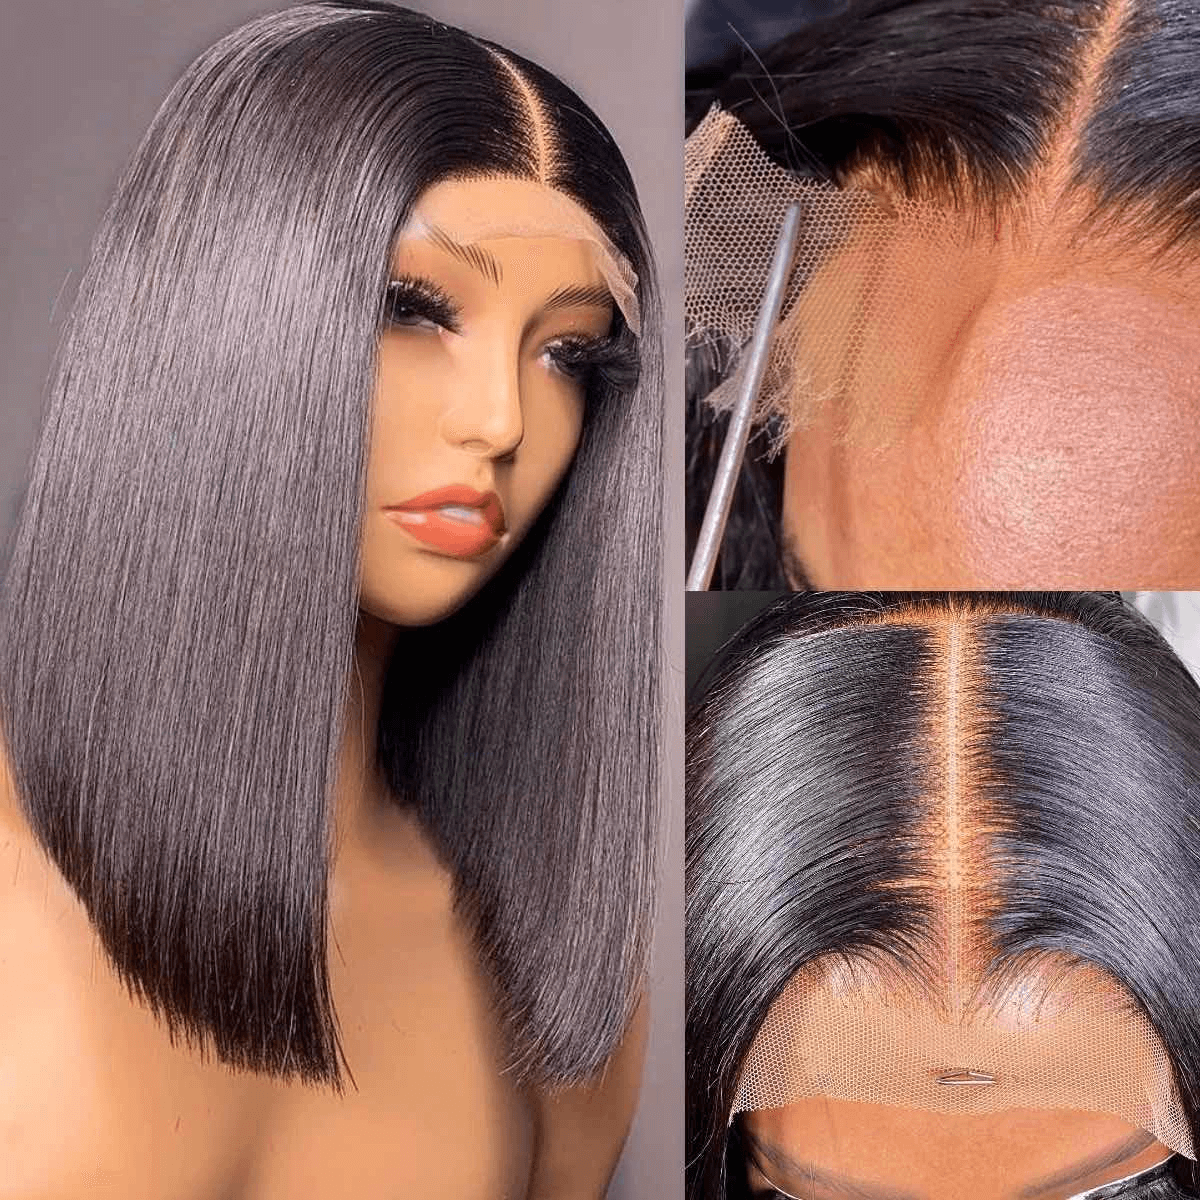 Wesface Wigs 4X4 Lace Closure Bob Wigs Human Hair Straight Short Bob Glueless Wigs Undetectable Transparent Lace Wig Pre Plucked for Women